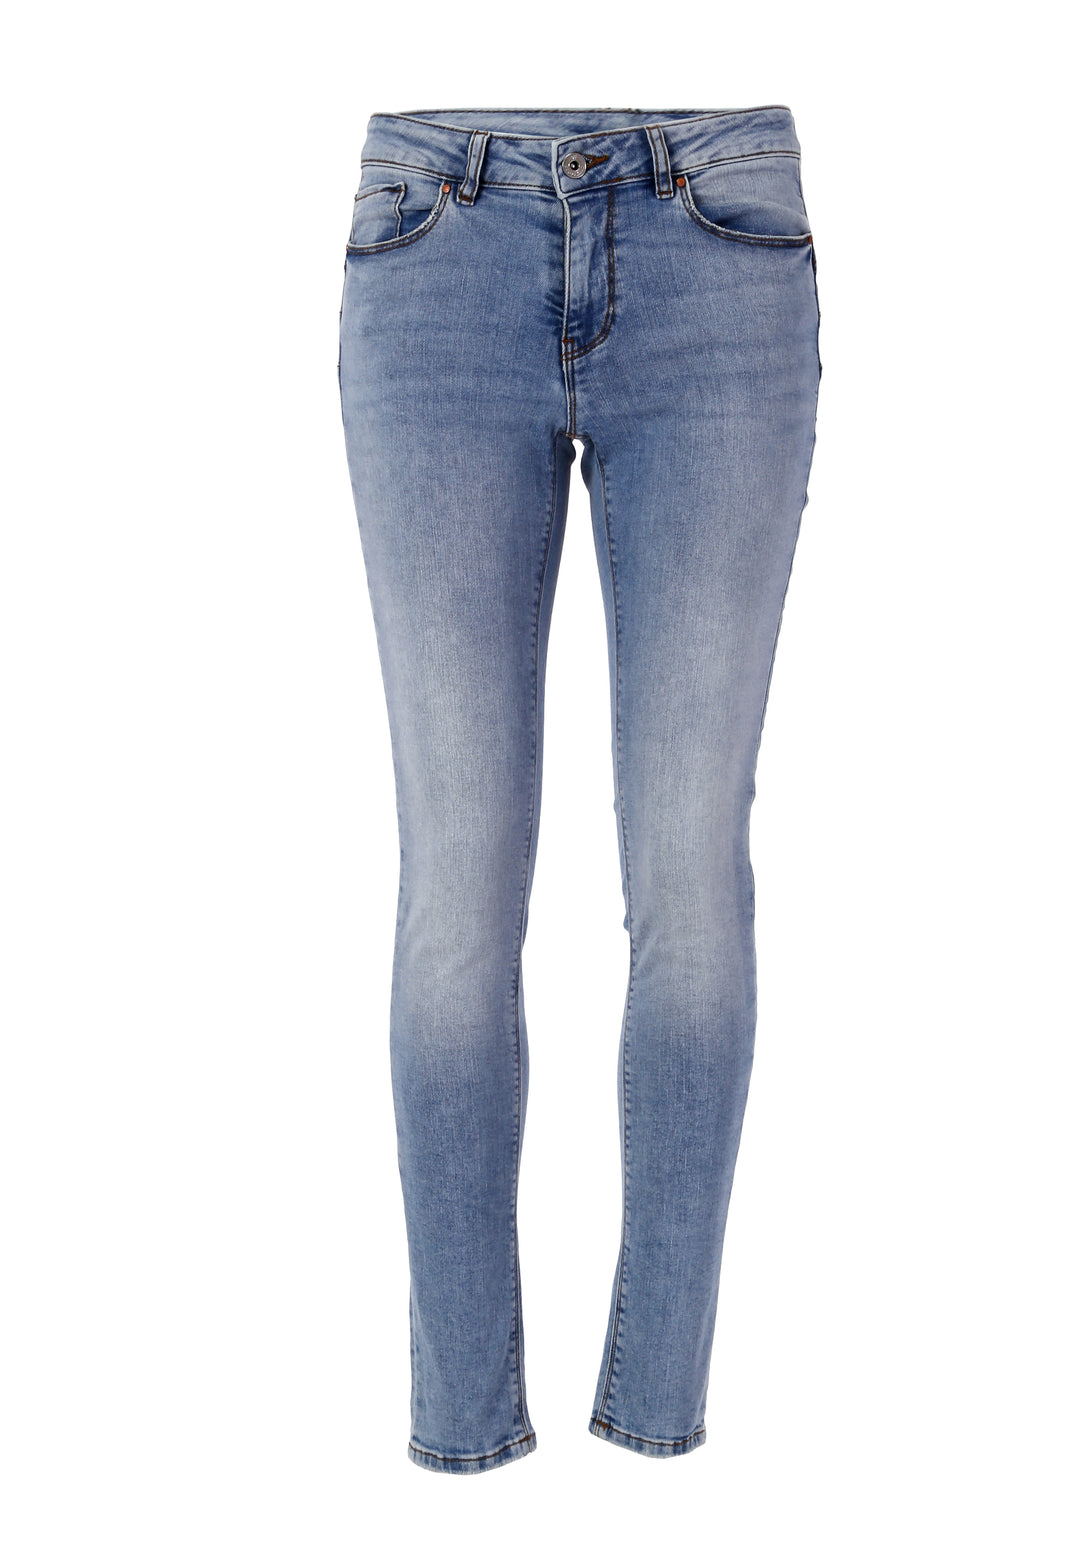 Jeans skinny fit made in denim with push-up effect with light wash Fracomina FP24SV1001D40103-062-1